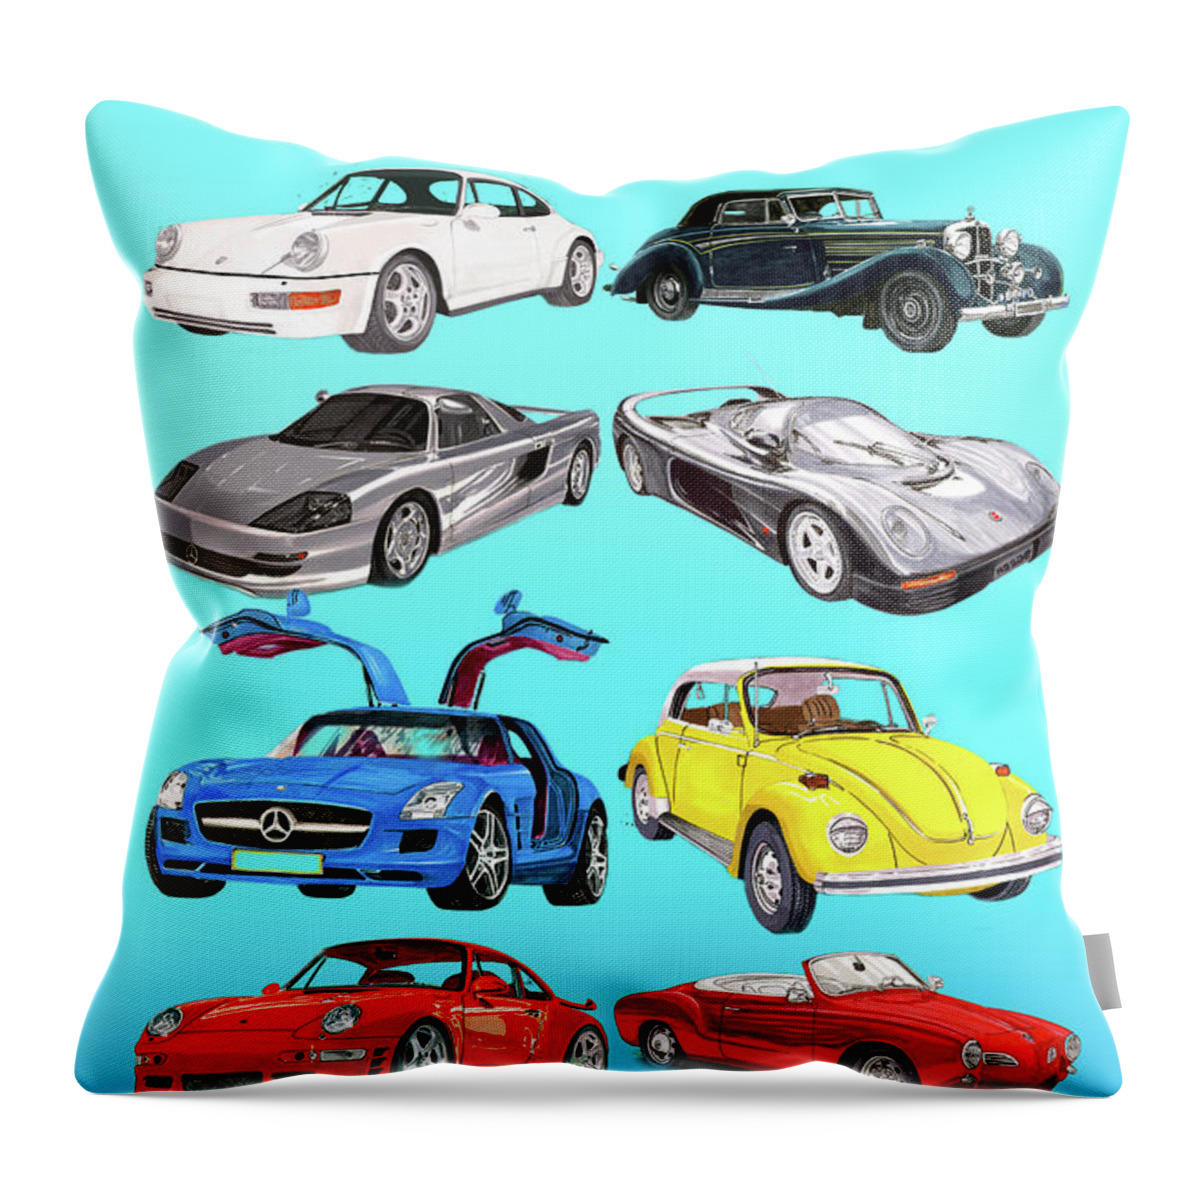 Watercolor Renderings Of German Sports Cars Throw Pillow featuring the painting German Sports Cars by Jack Pumphrey